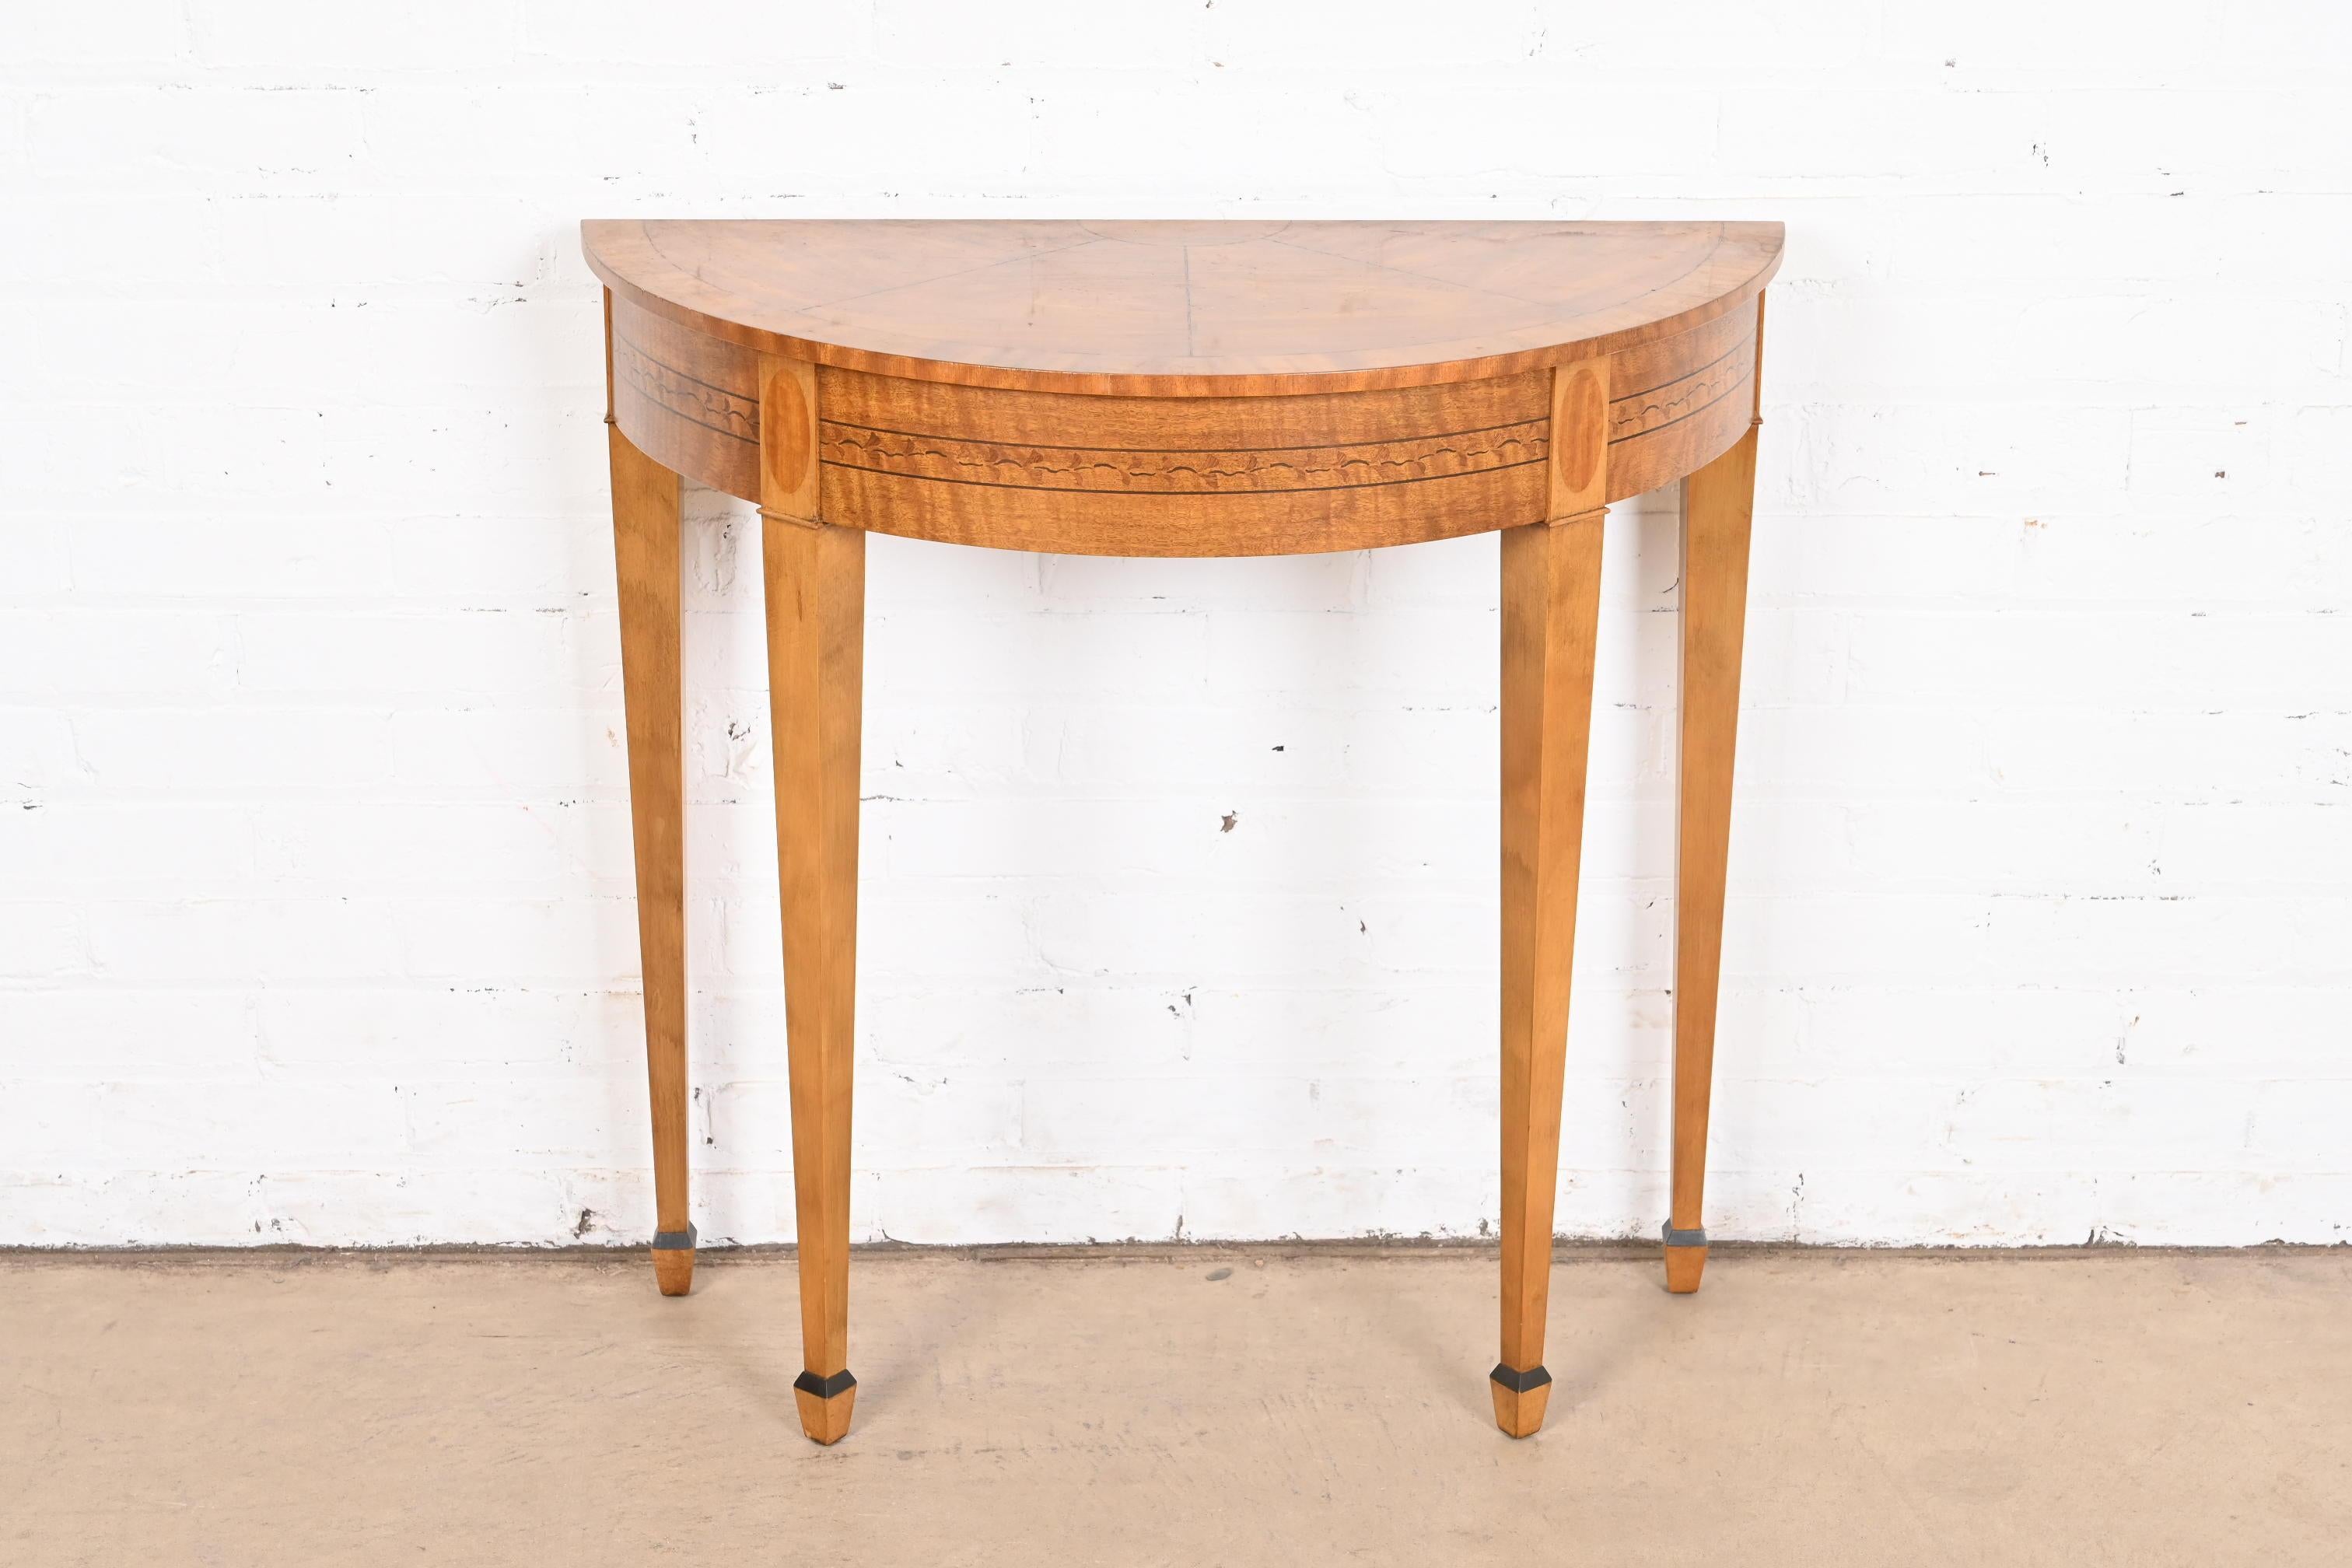 A gorgeous Federal style demilune console table or entry table

By Laura Ashley for Baker Furniture

USA, Circa 1990s

Mahogany, with inlaid floral marquetry.

Measures: 30